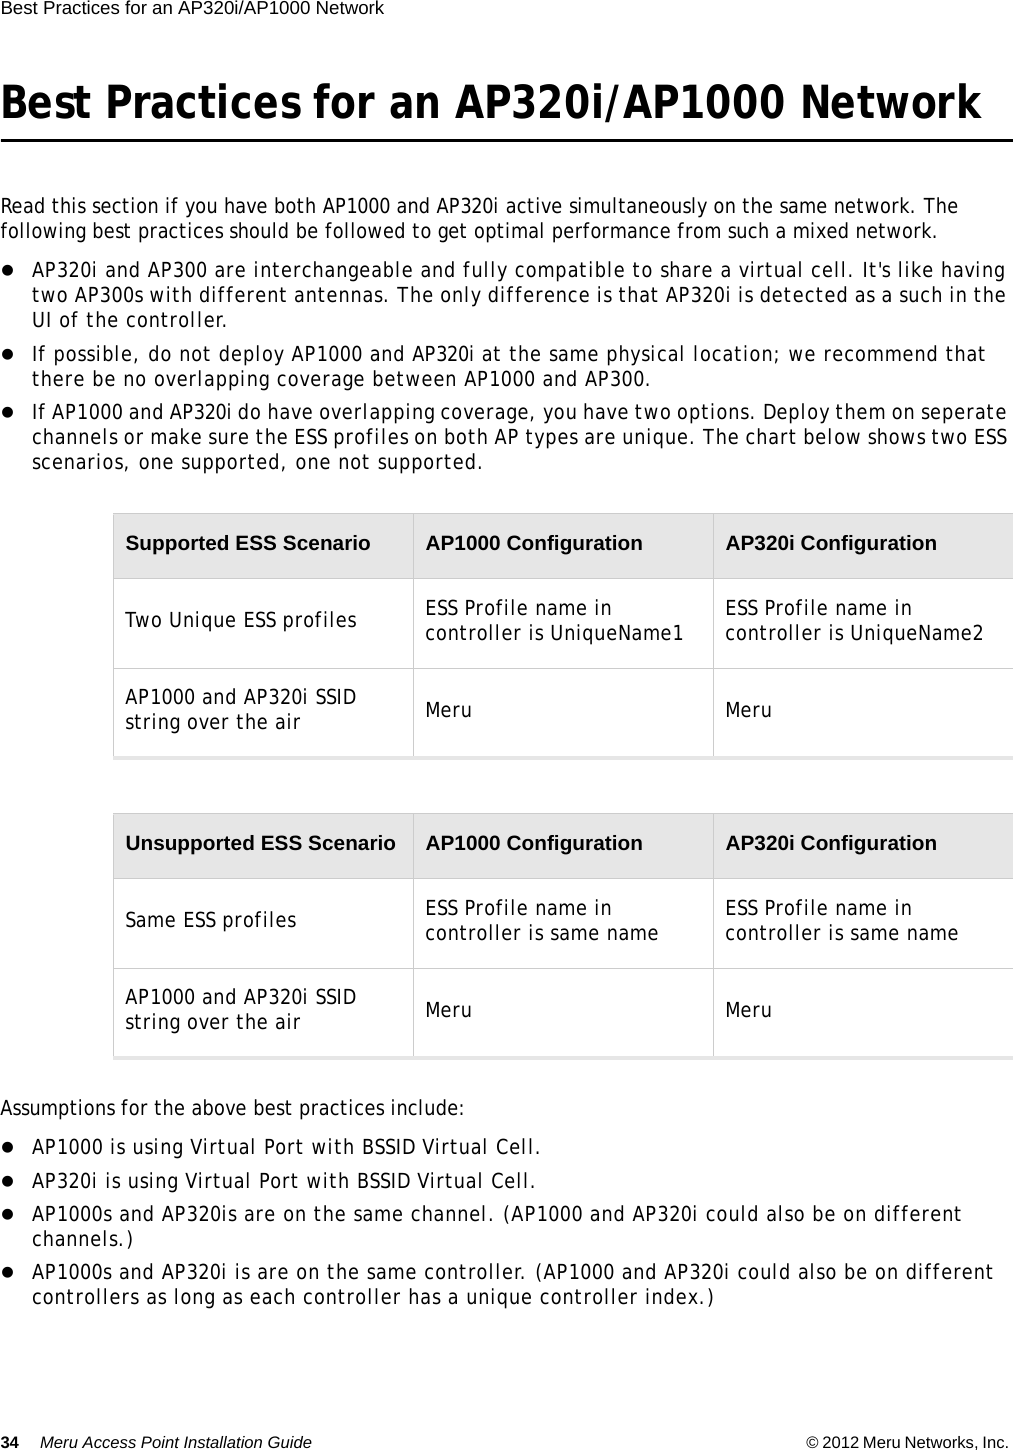 34 Meru Access Point Installation Guide © 2012 Meru Networks, Inc. Best Practices for an AP320i/AP1000 Network Best Practices for an AP320i/AP1000 Network Read this section if you have both AP1000 and AP320i active simultaneously on the same network. The following best practices should be followed to get optimal performance from such a mixed network. AP320i and AP300 are interchangeable and fully compatible to share a virtual cell. It&apos;s like having two AP300s with different antennas. The only difference is that AP320i is detected as a such in the UI of the controller.If possible, do not deploy AP1000 and AP320i at the same physical location; we recommend that there be no overlapping coverage between AP1000 and AP300. If AP1000 and AP320i do have overlapping coverage, you have two options. Deploy them on seperate channels or make sure the ESS profiles on both AP types are unique. The chart below shows two ESS scenarios, one supported, one not supported. Assumptions for the above best practices include:AP1000 is using Virtual Port with BSSID Virtual Cell. AP320i is using Virtual Port with BSSID Virtual Cell.AP1000s and AP320is are on the same channel. (AP1000 and AP320i could also be on different channels.) AP1000s and AP320i is are on the same controller. (AP1000 and AP320i could also be on different controllers as long as each controller has a unique controller index.) Supported ESS Scenario AP1000 Configuration AP320i ConfigurationTwo Unique ESS profiles ESS Profile name in controller is UniqueName1 ESS Profile name in controller is UniqueName2AP1000 and AP320i SSID string over the air  Meru MeruUnsupported ESS Scenario AP1000 Configuration AP320i ConfigurationSame ESS profiles ESS Profile name in controller is same name ESS Profile name in controller is same nameAP1000 and AP320i SSID string over the air  Meru Meru